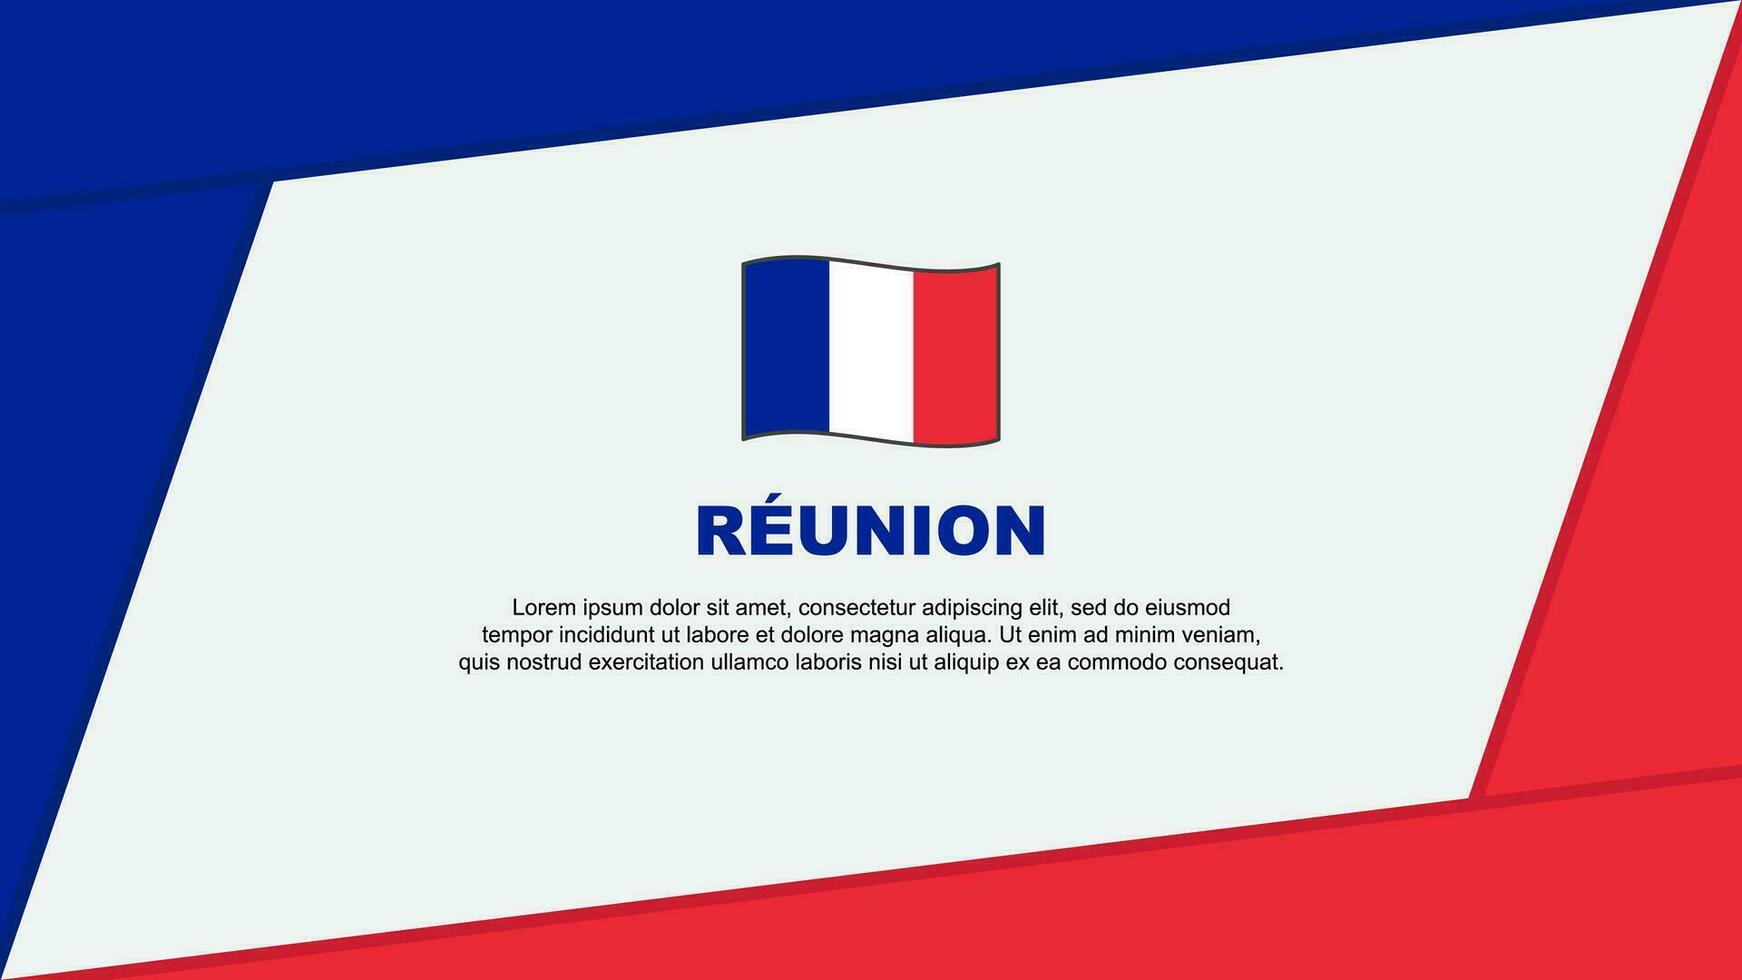 Reunion Flag Abstract Background Design Template. Reunion Independence Day Banner Cartoon Vector Illustration. Reunion Banner